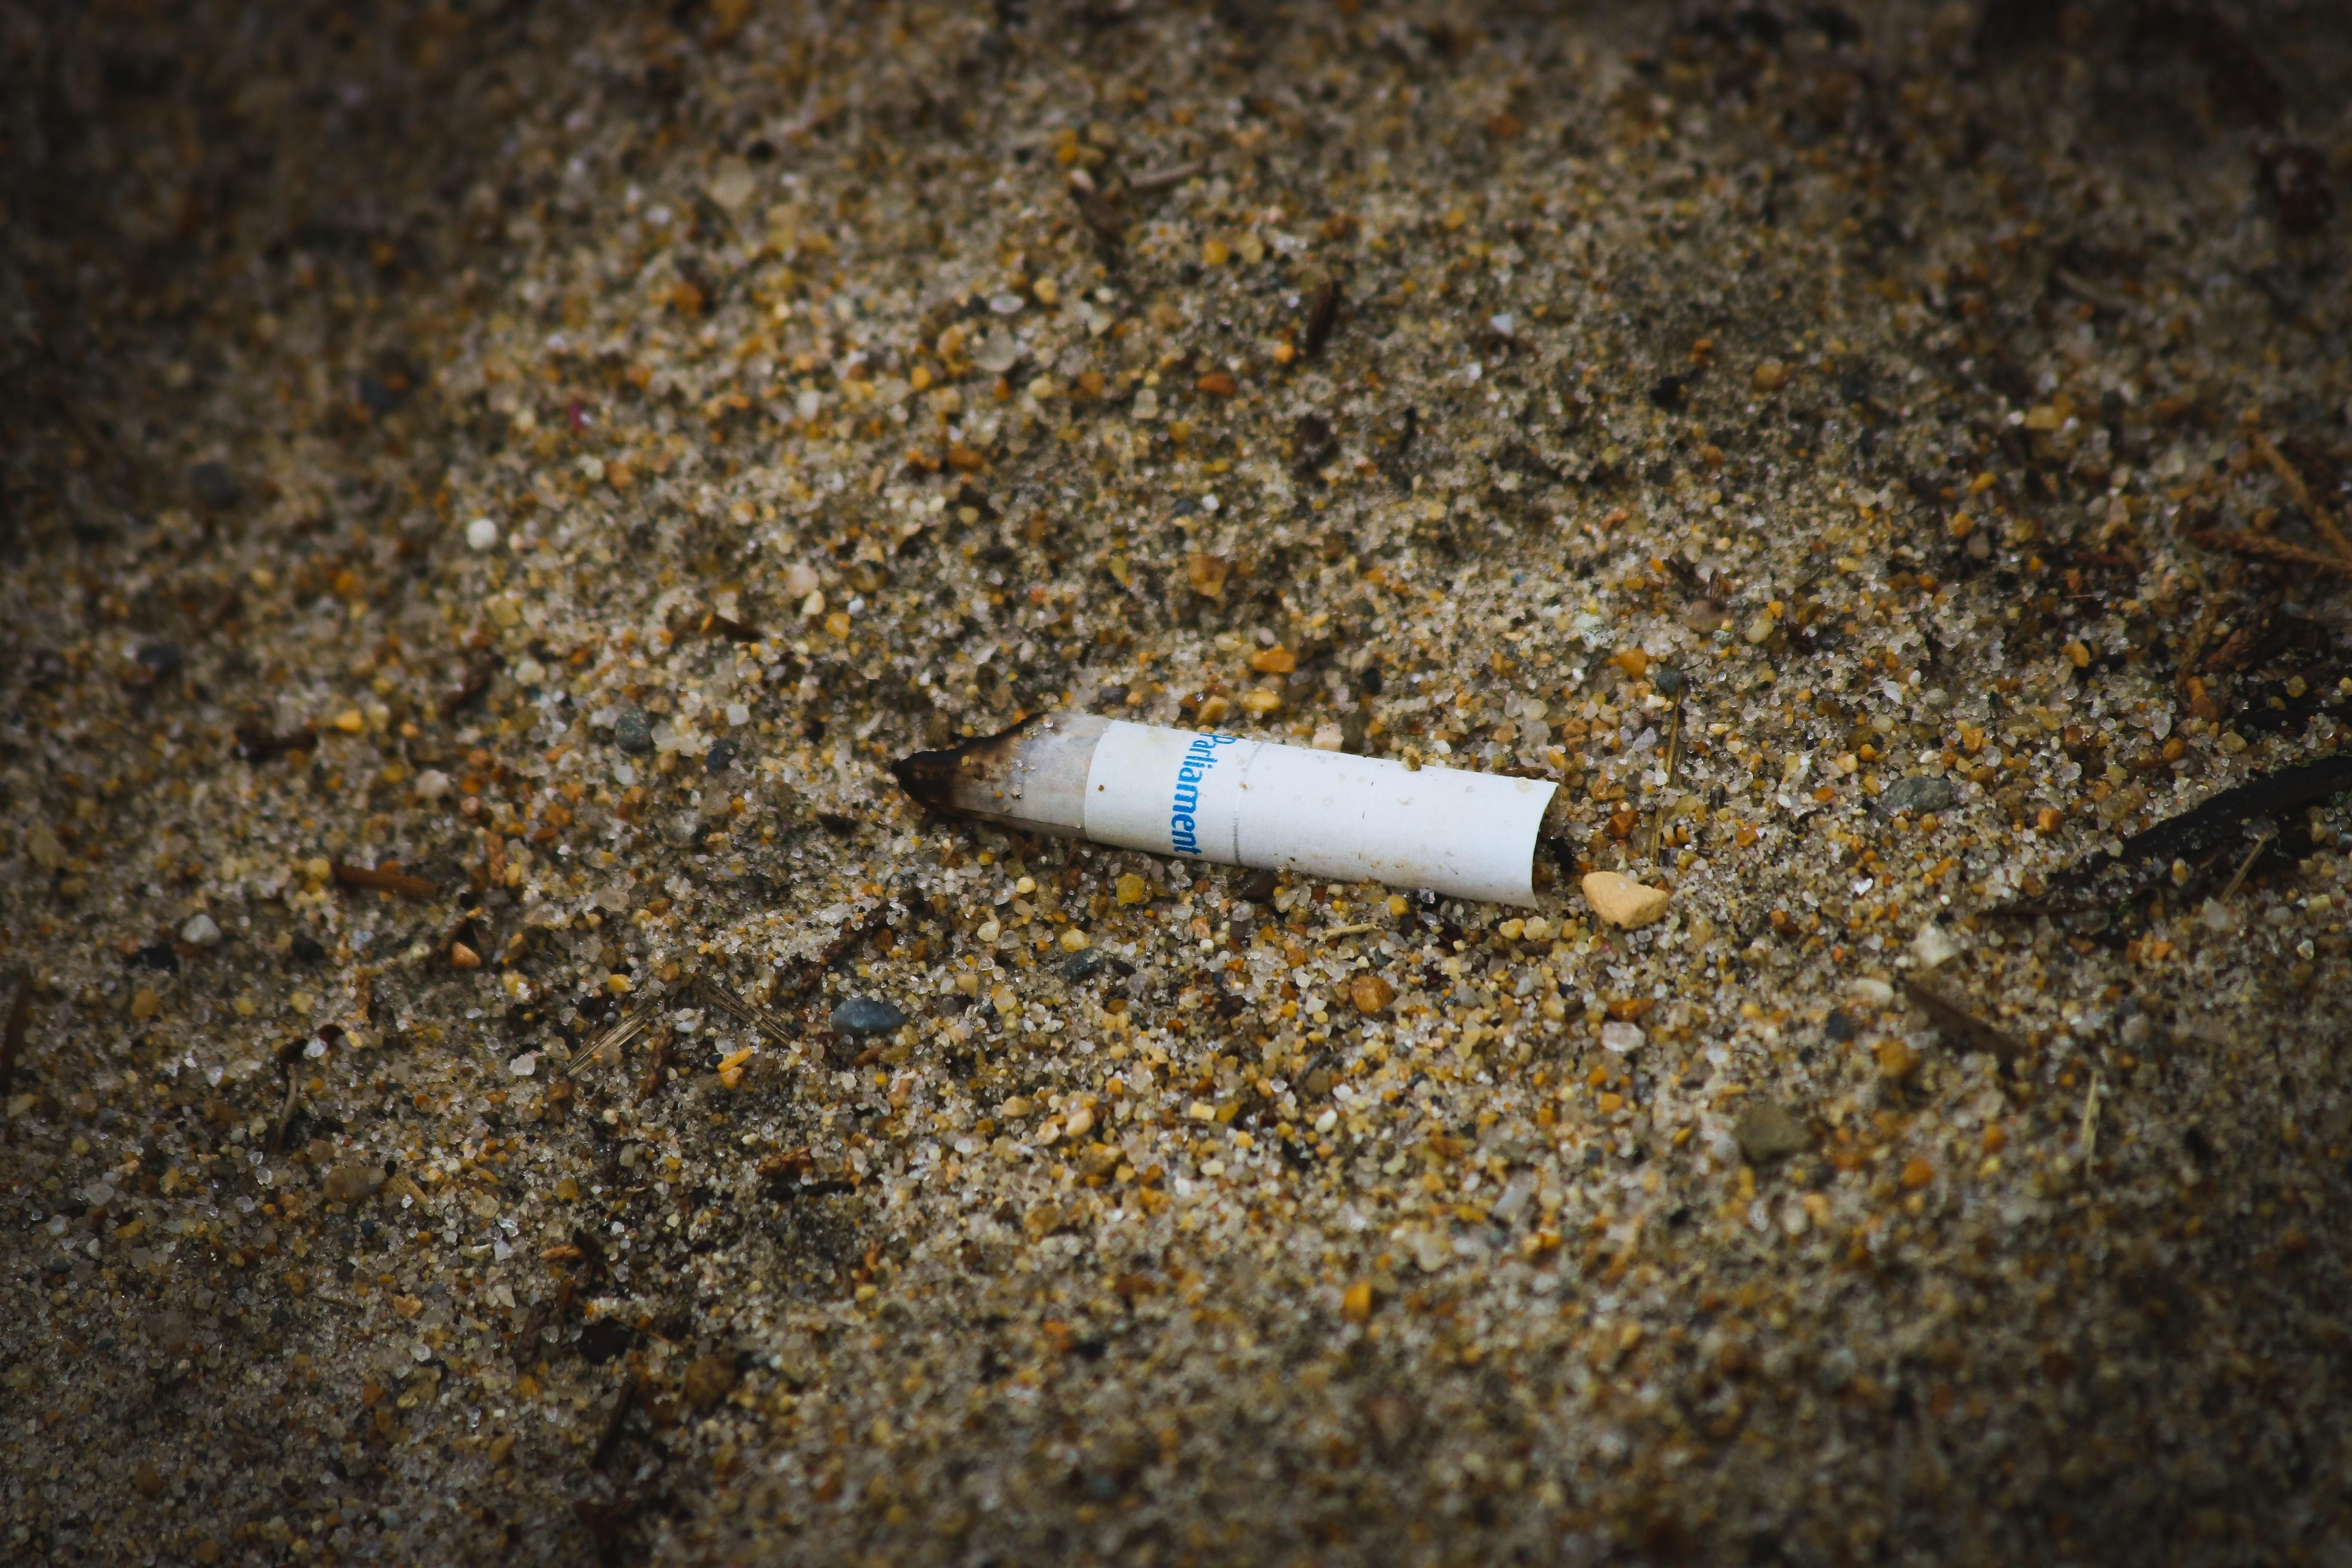 Many people are unaware of the environmental impacts of cigarette litter.  